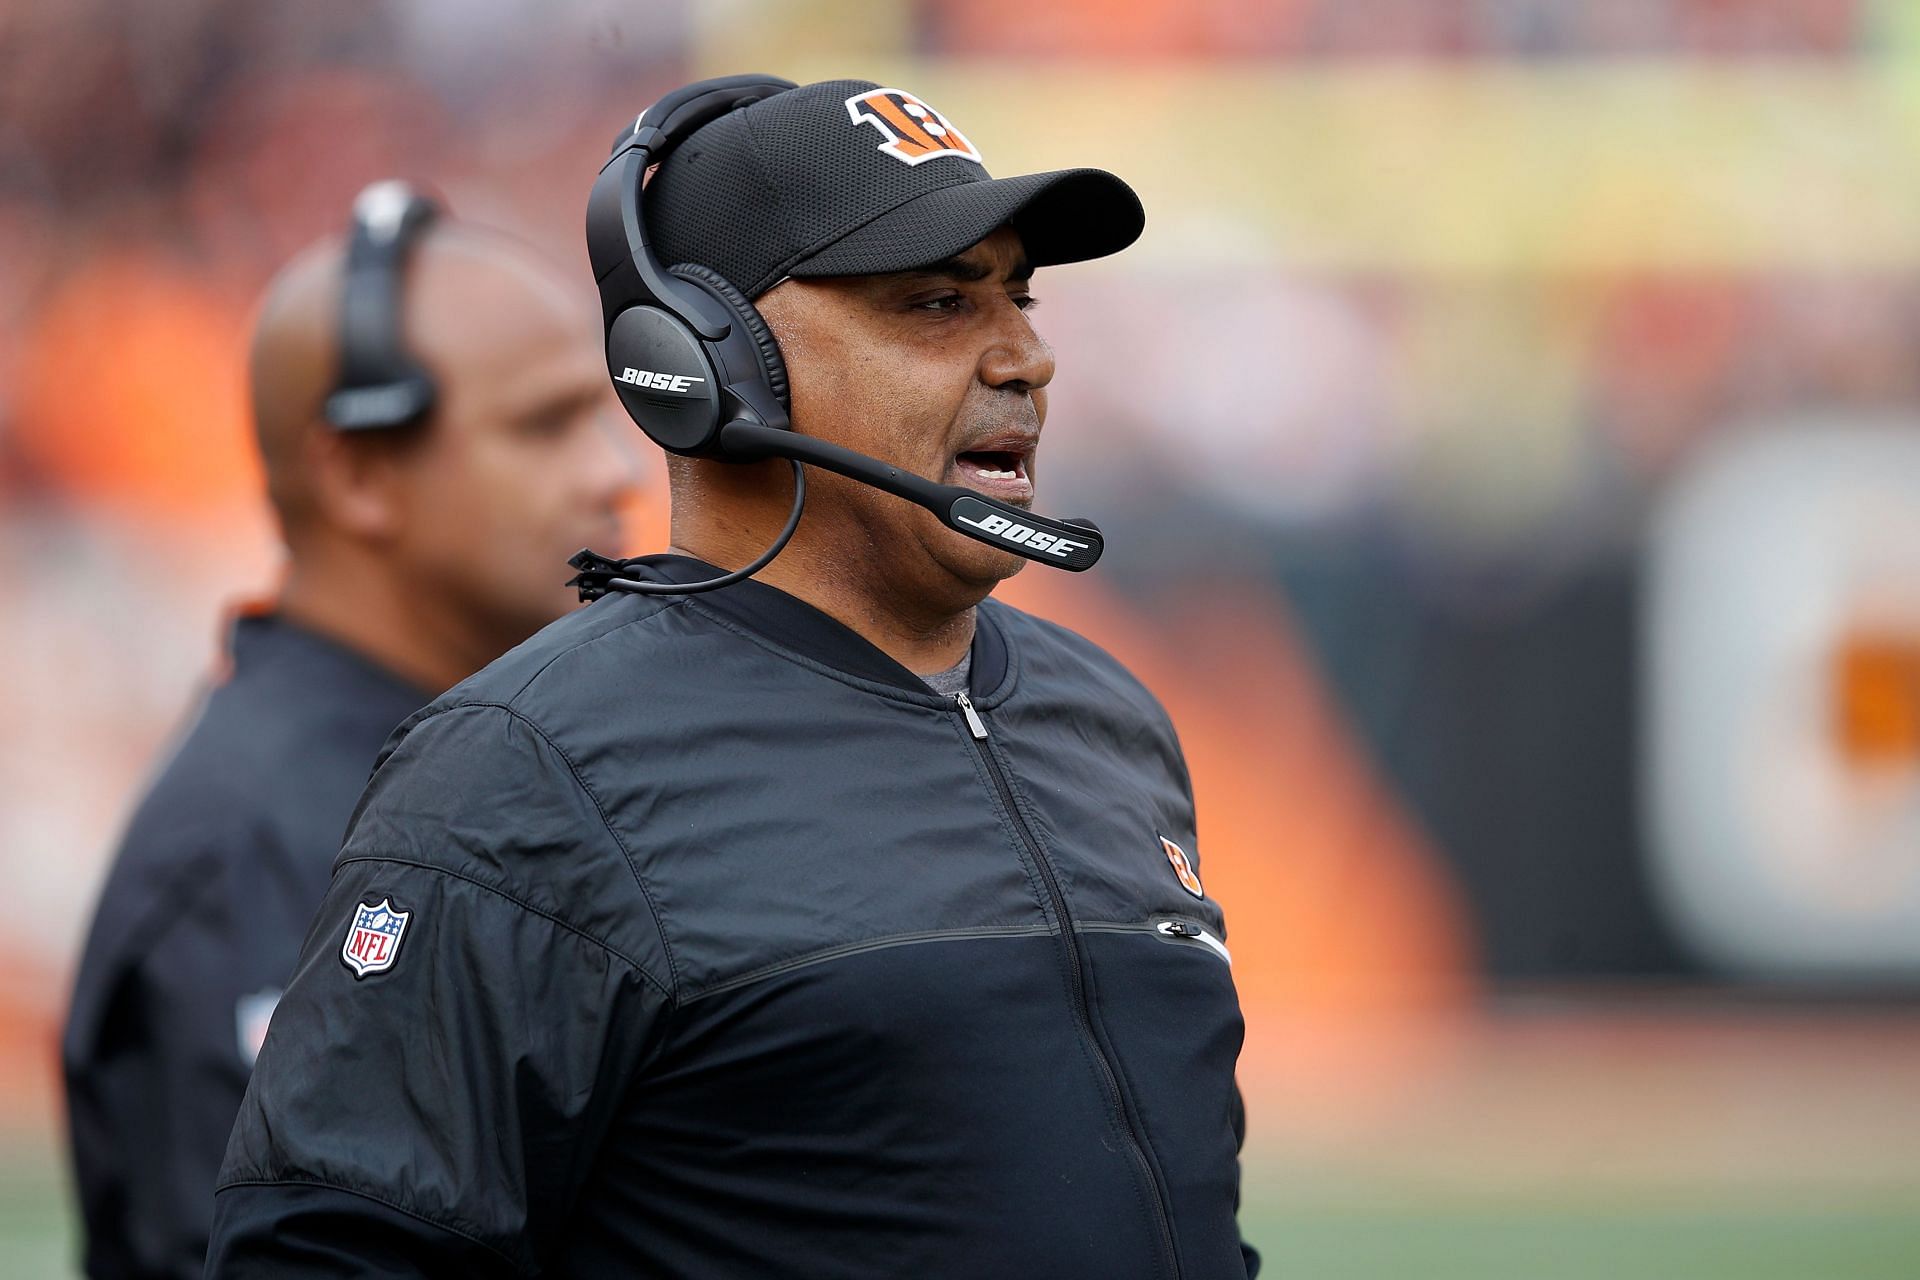 Marvin Lewis has spoken about his previous head coaching interviews